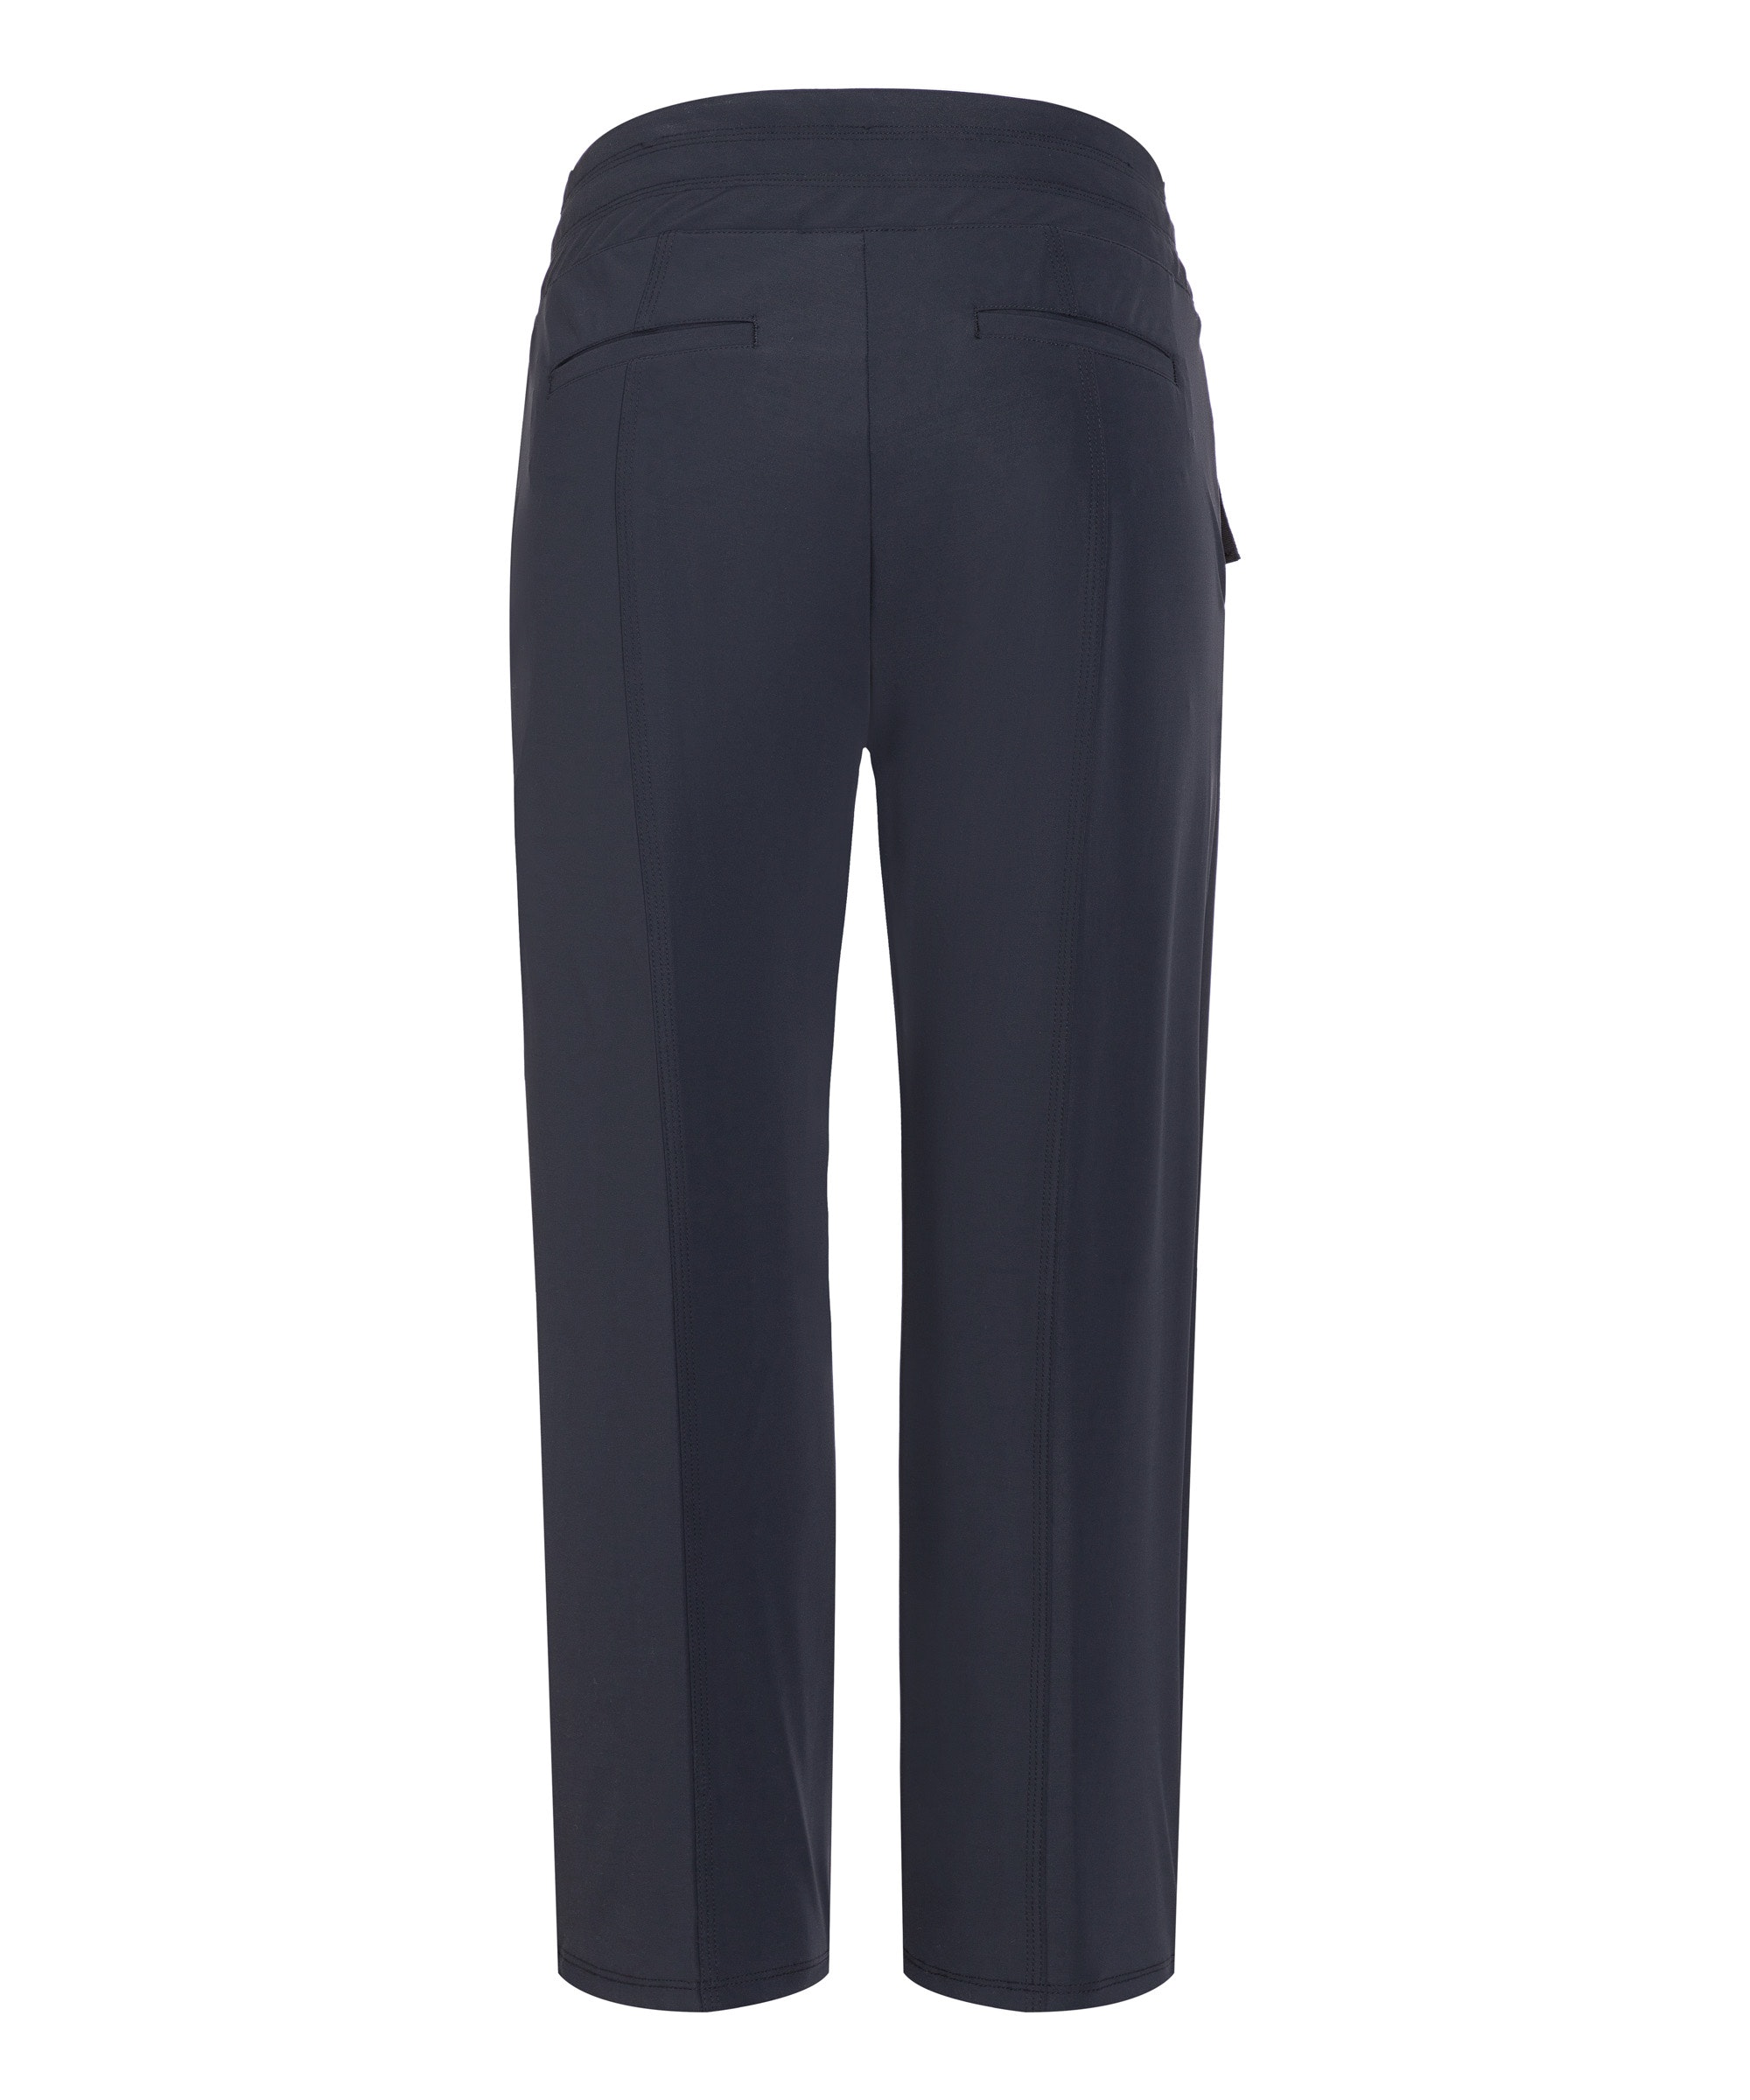 Cambio casual pants Caprice NAVY BLUE